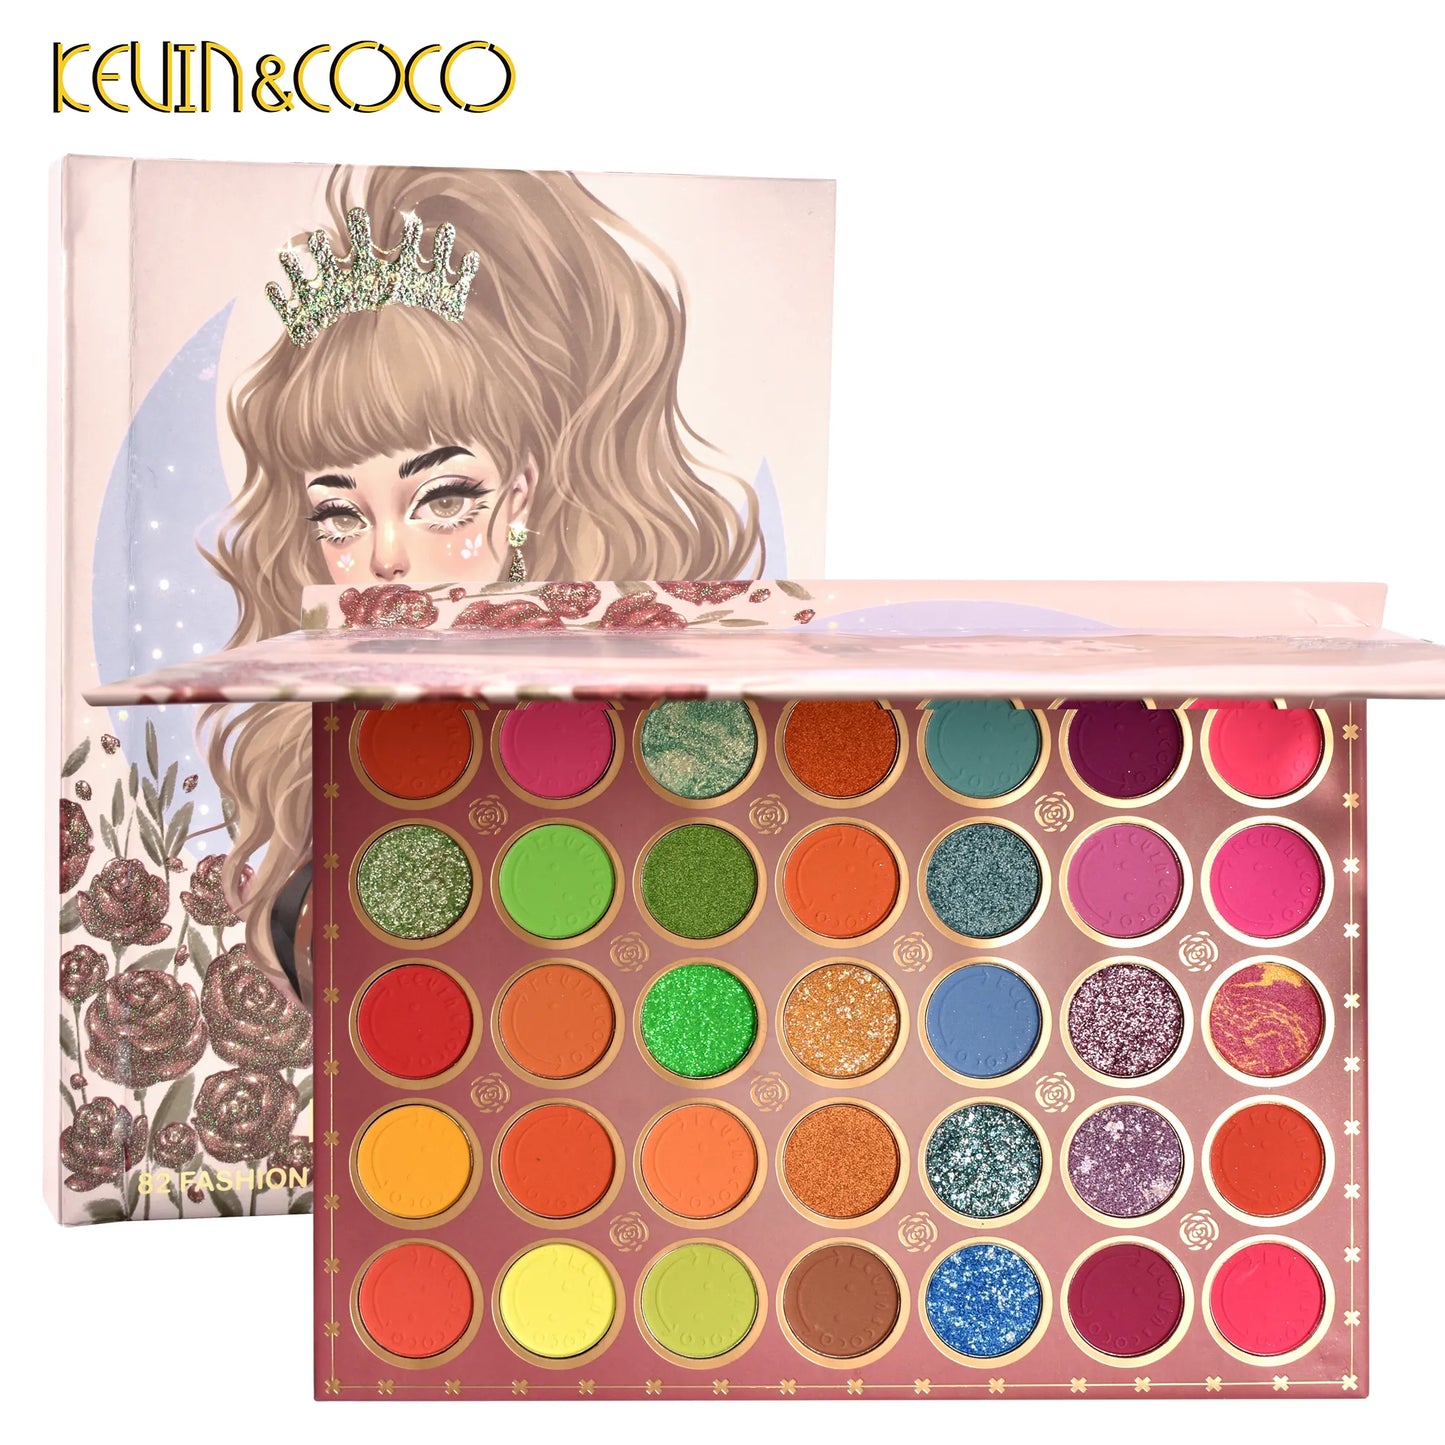 KEVIN&COCO 82 COLORS FACE PALETTE RED ROSES KC221386 R18